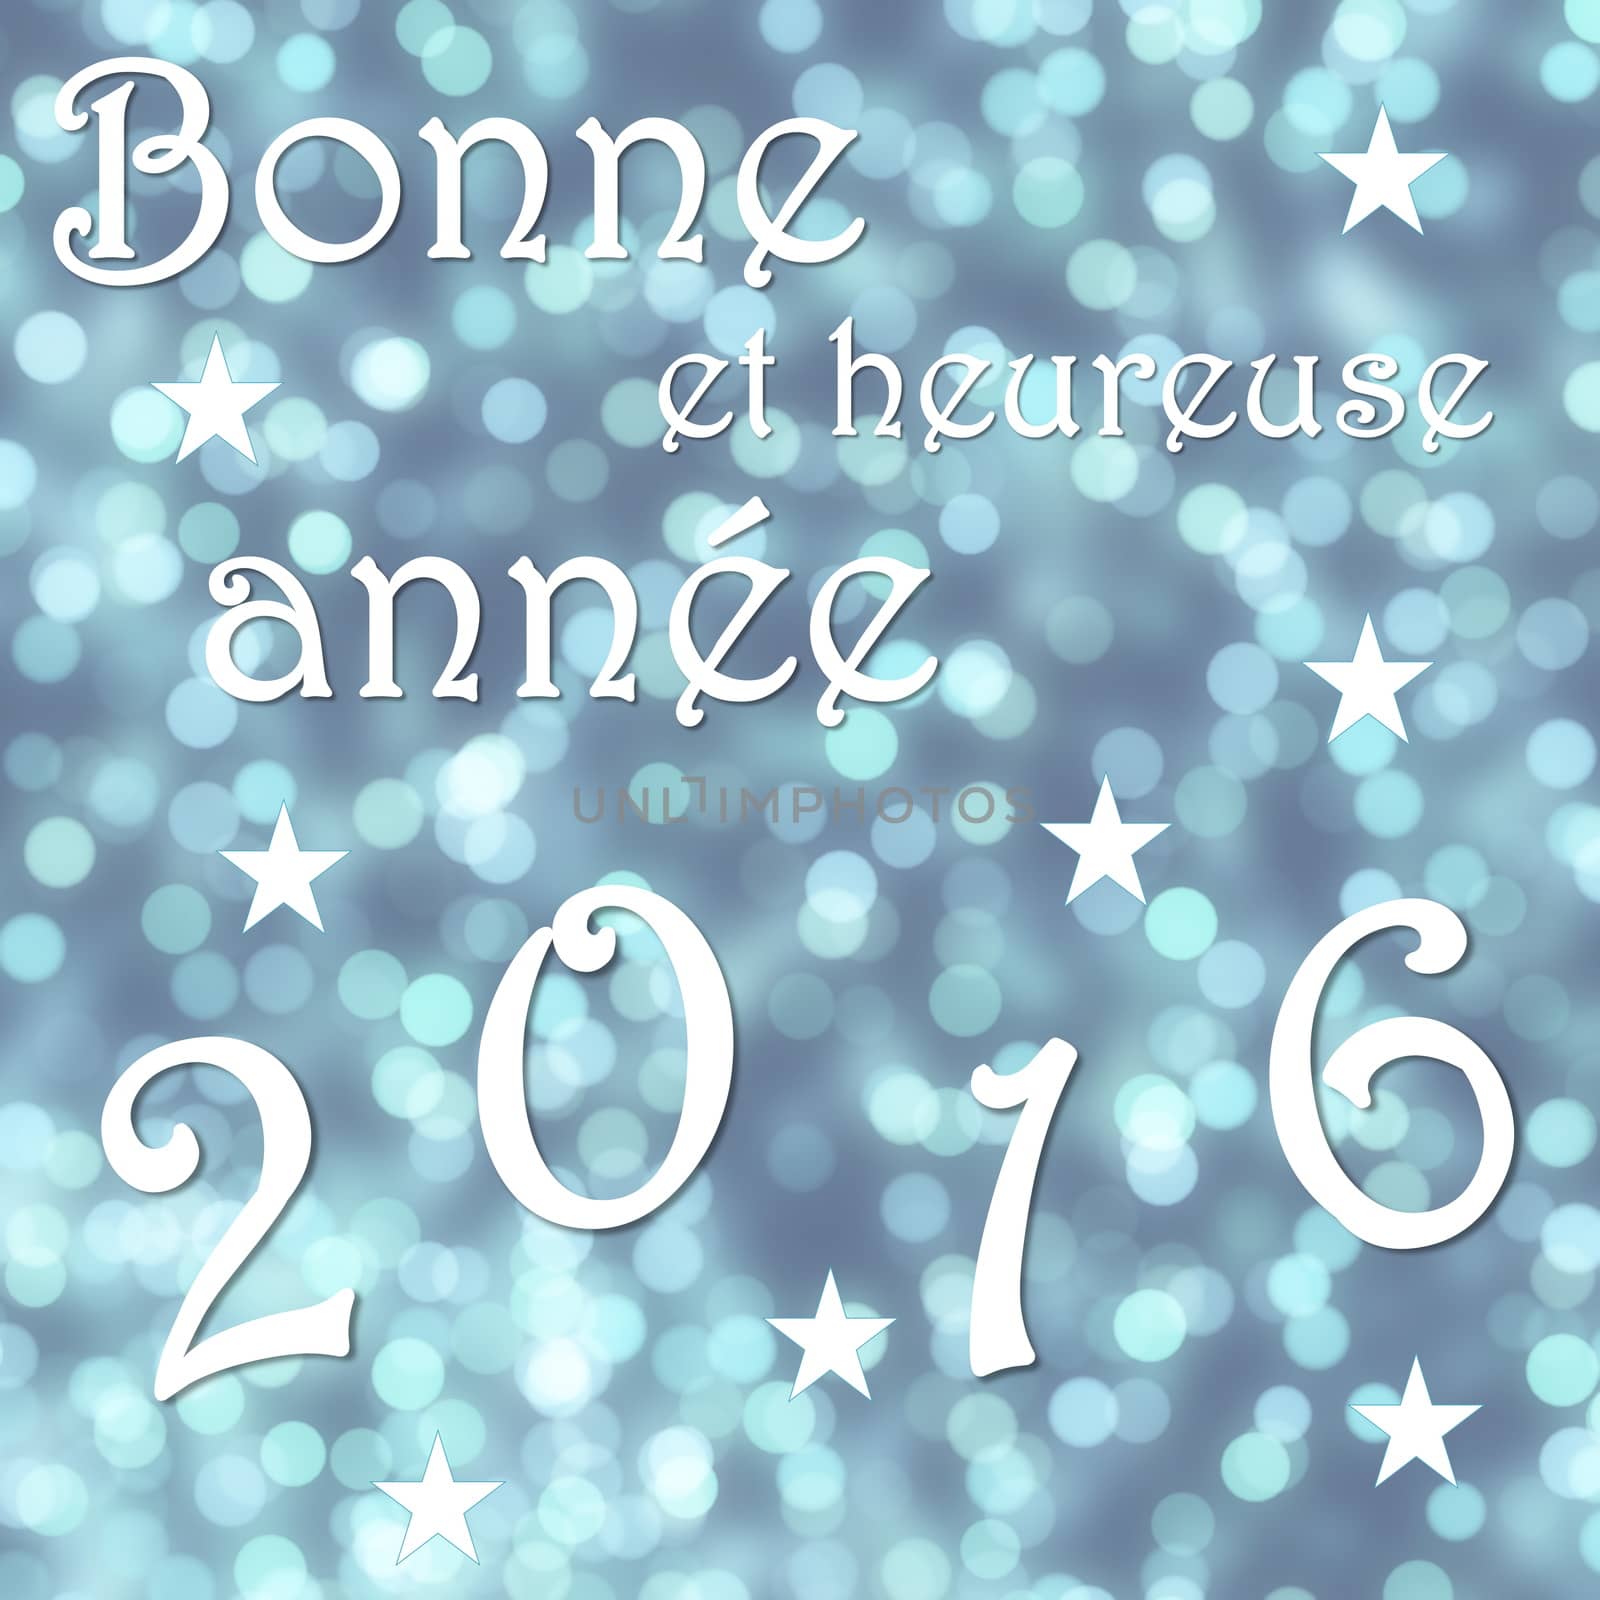 Happy new year 2016, french, in blue bokeh background with stars - 3D render